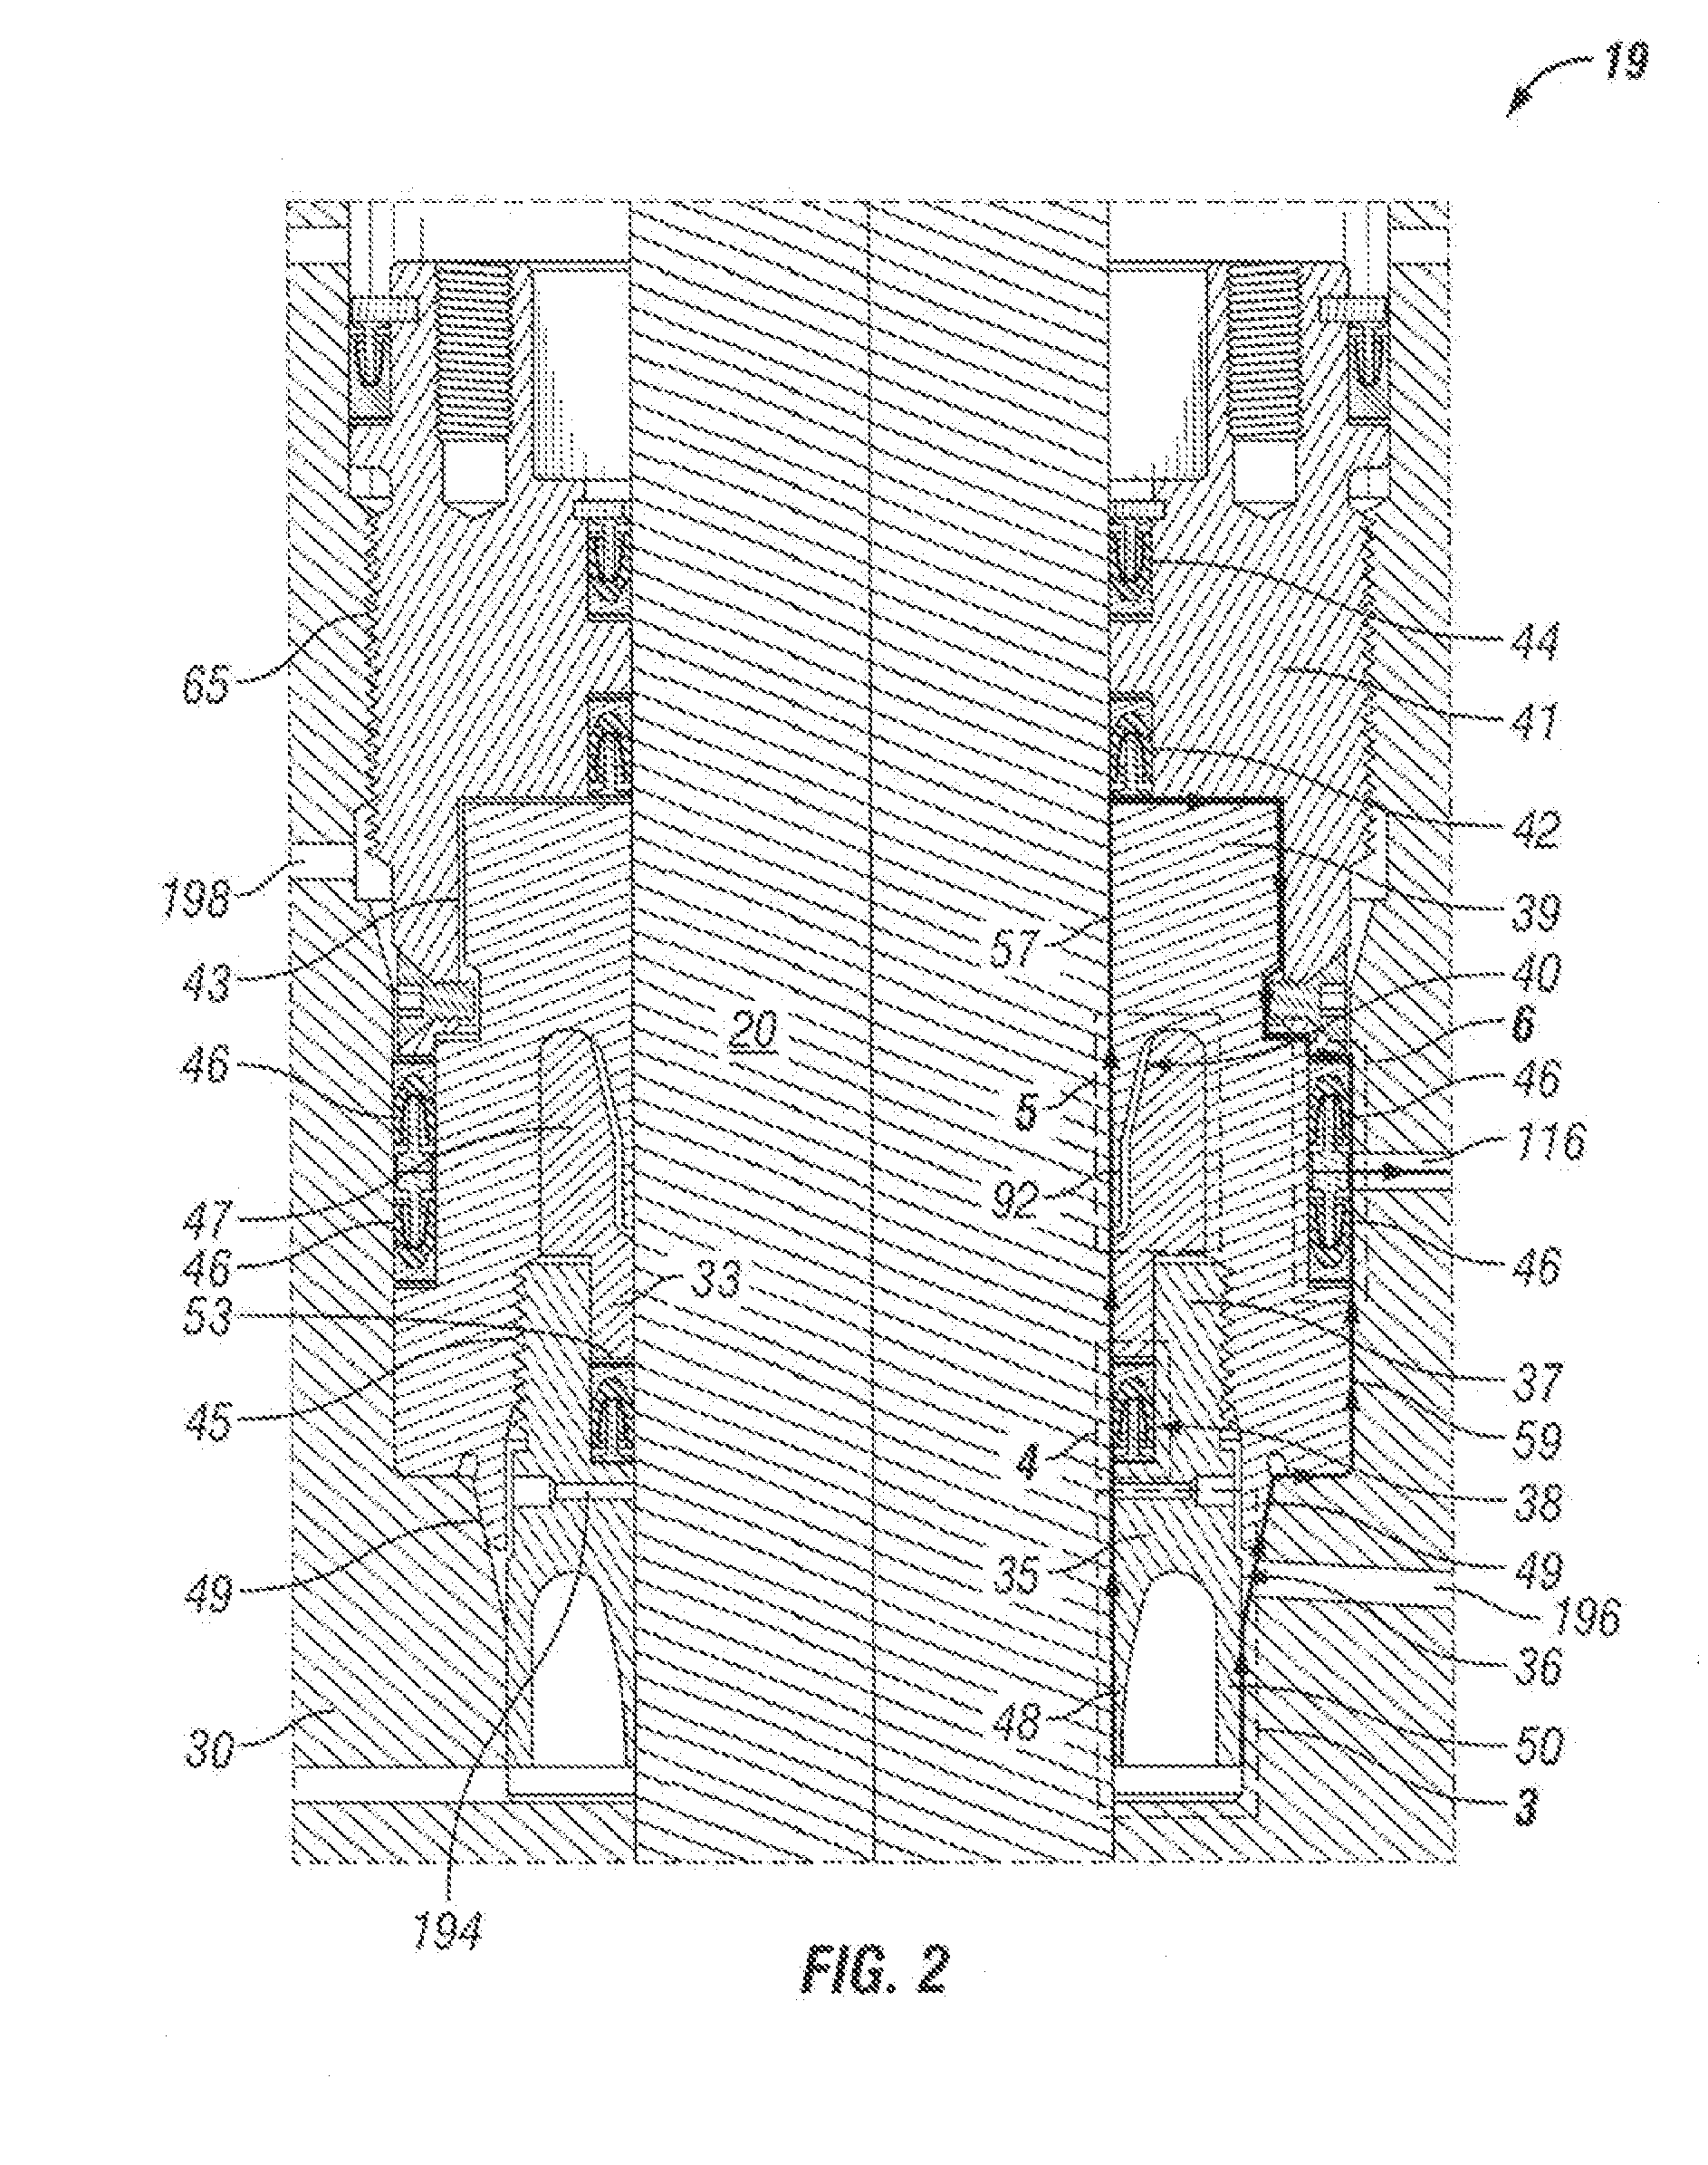 Multi-valve seat seal assembly for a gate valve